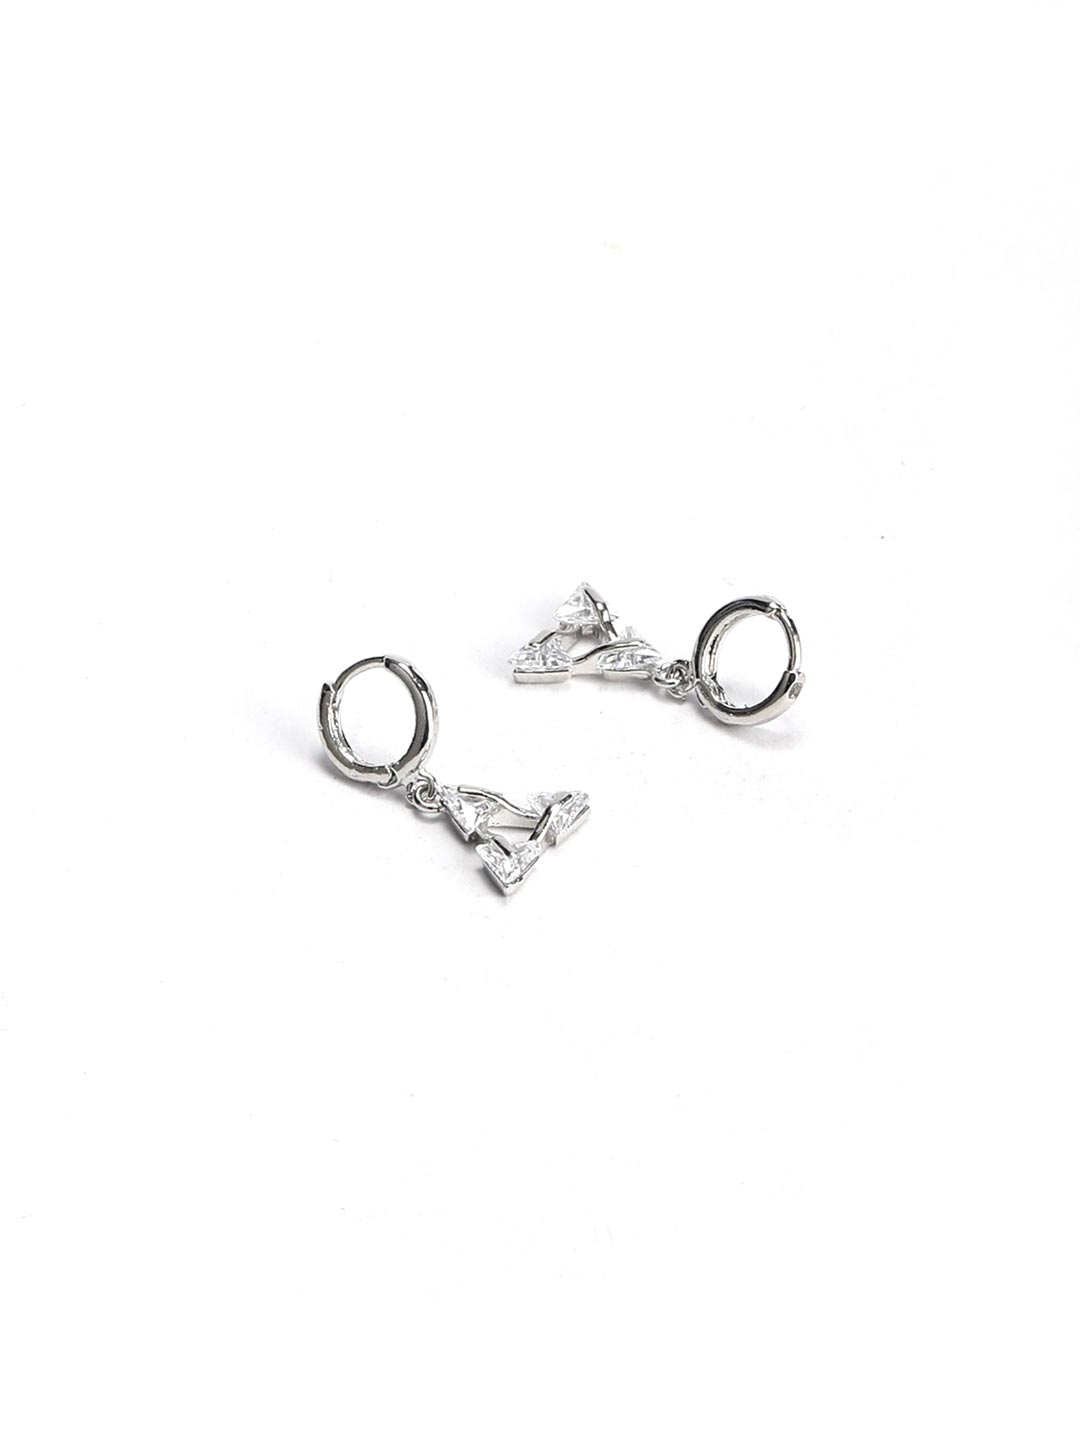 Artificial Stones Silver Plated Triangular Hoop Earring